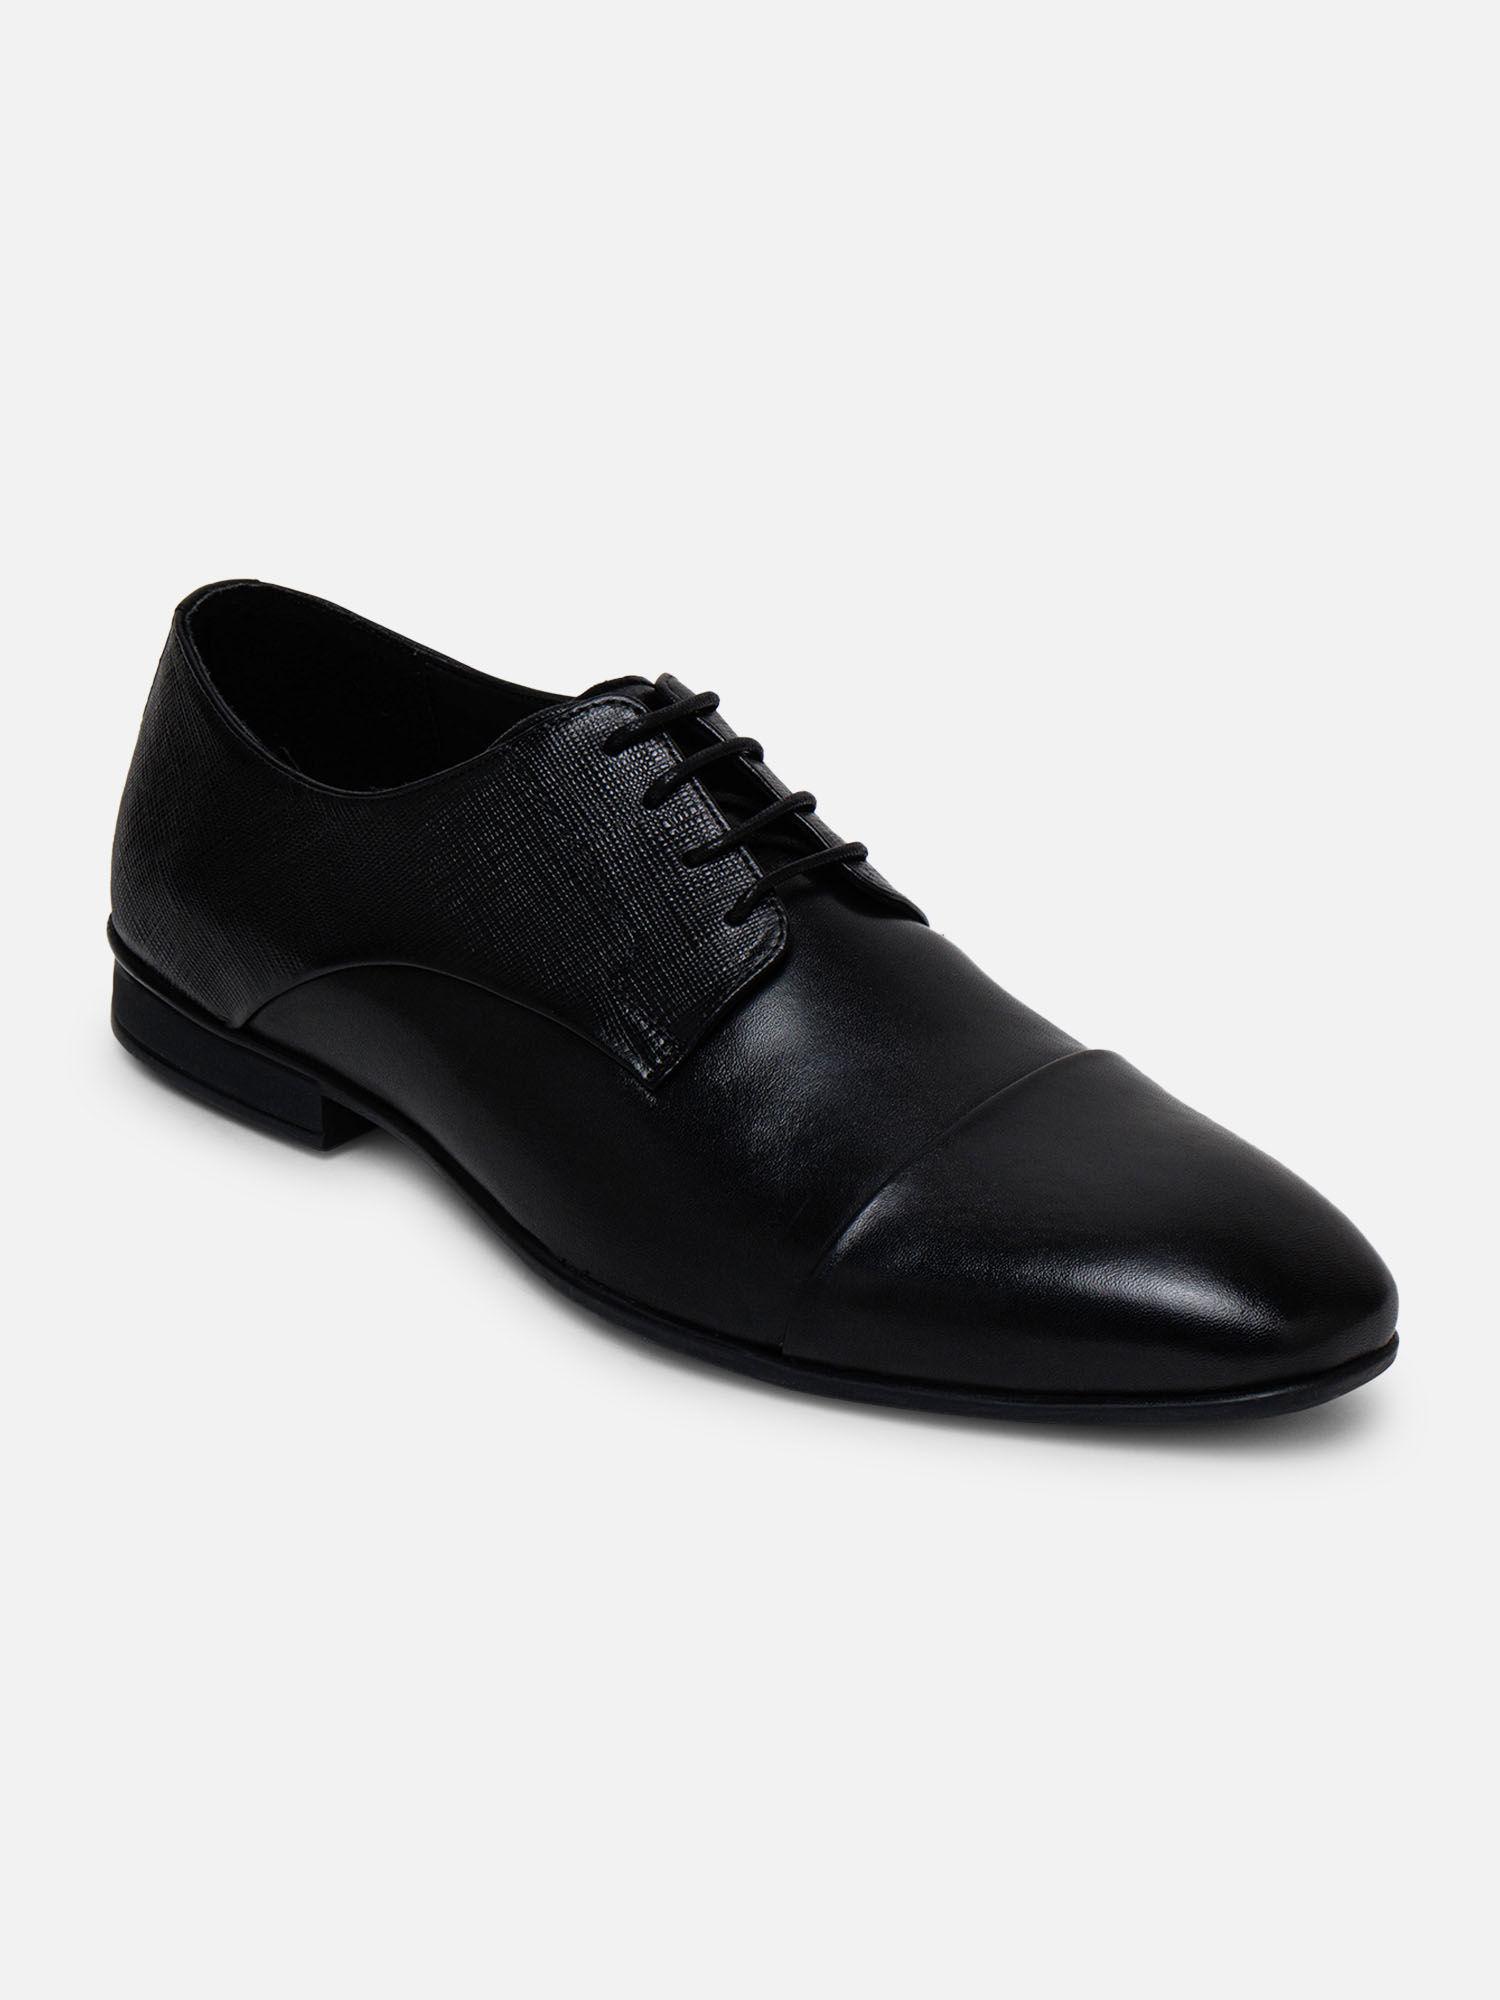 mens casual lace-ups oxfords formal shoes black